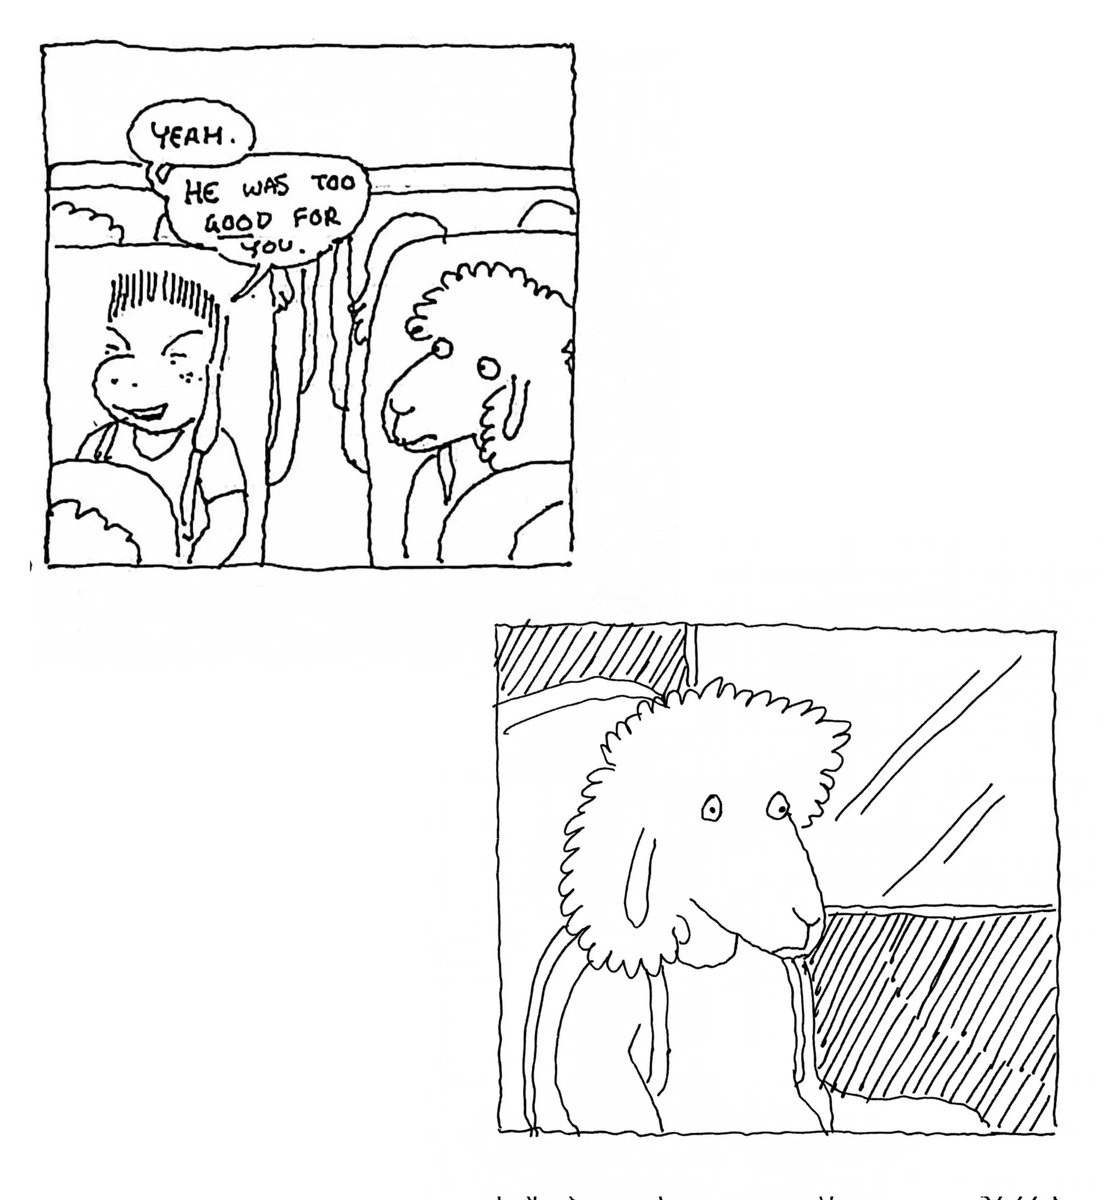 Here's what it was like growin' up as a kid nobody really liked that much—in comic form